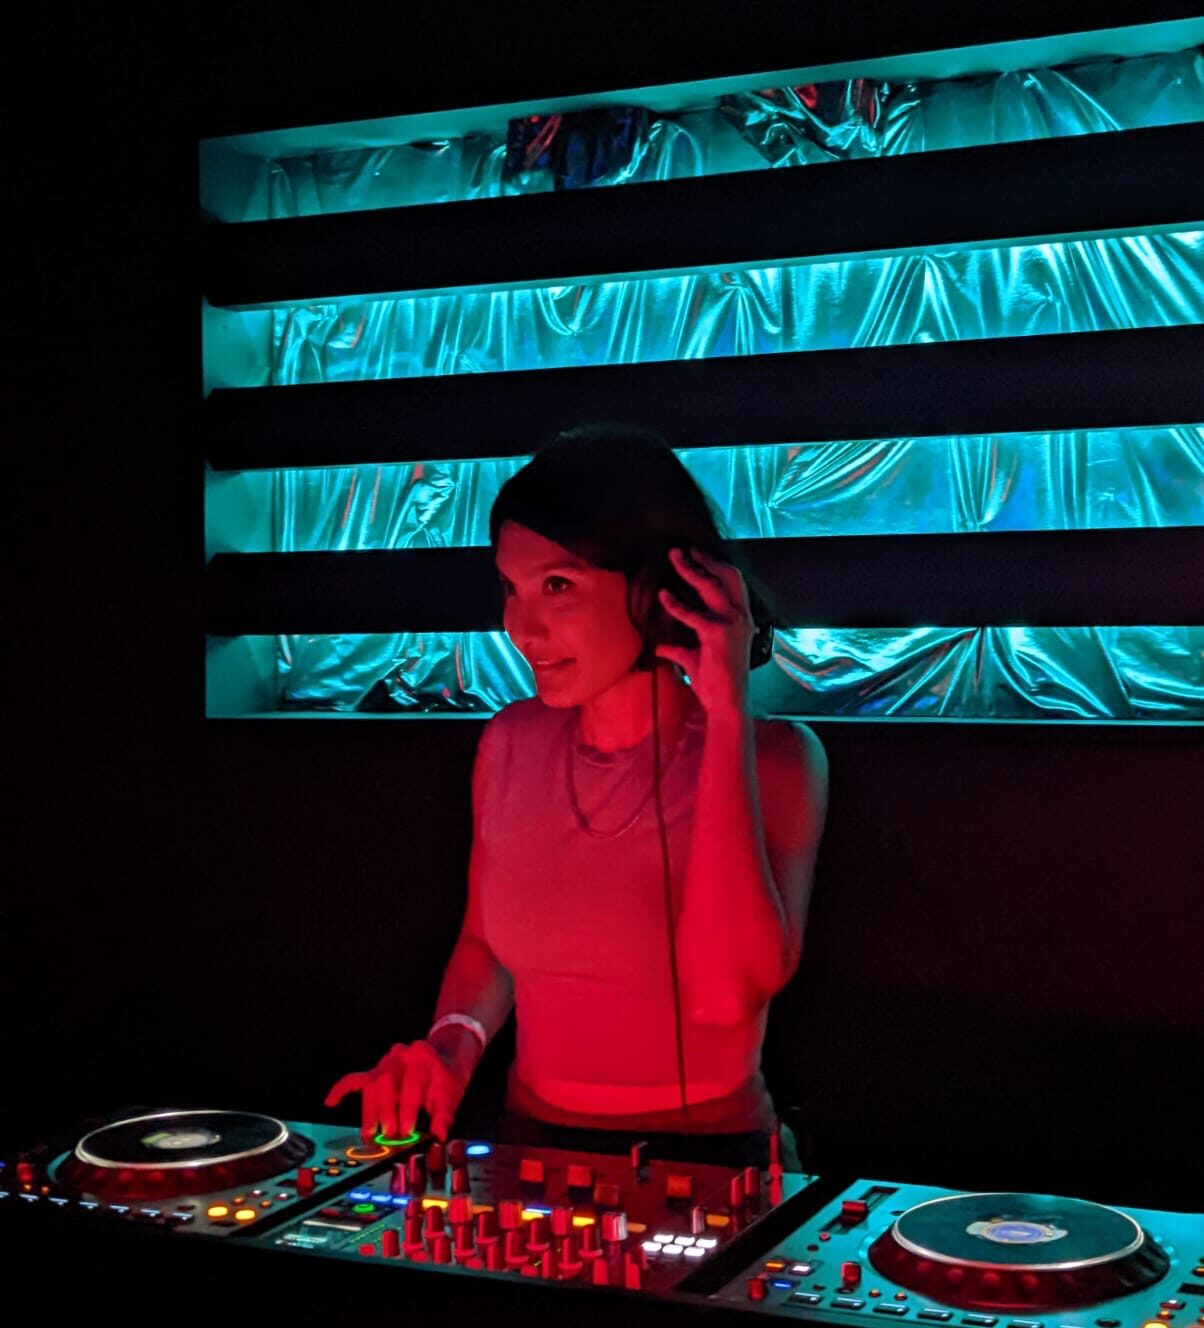 Image of Marium DJing, with blue and silver lighting behind her.